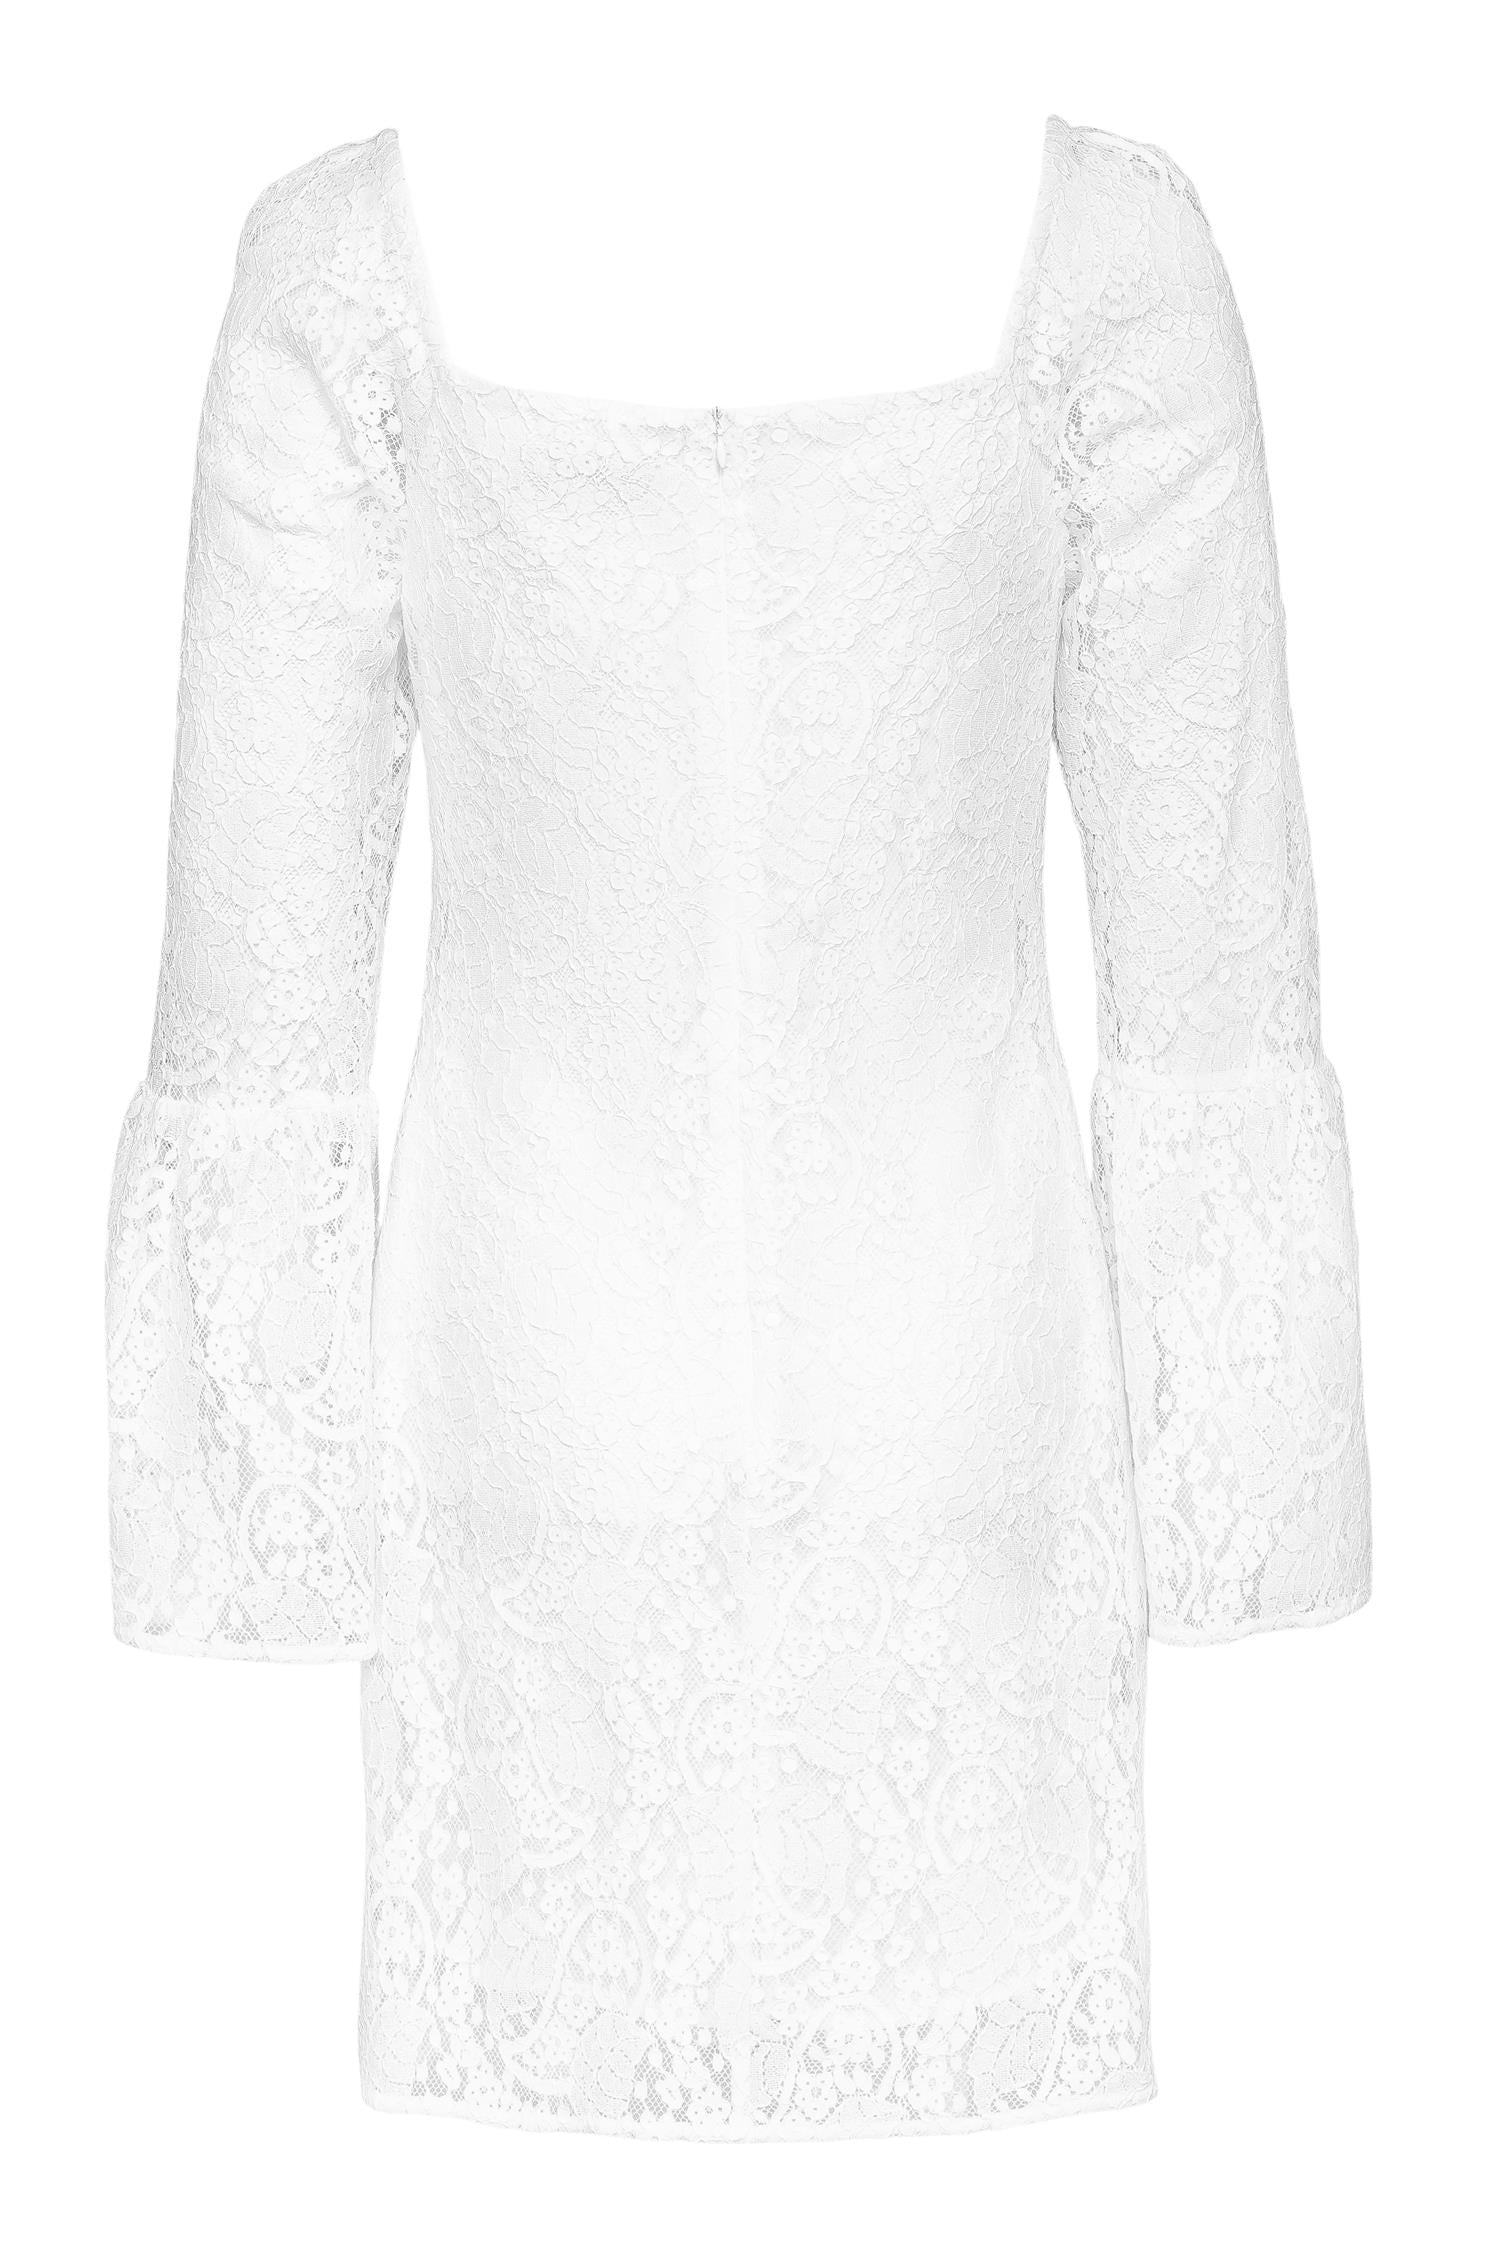 Brittany Dress White Lace